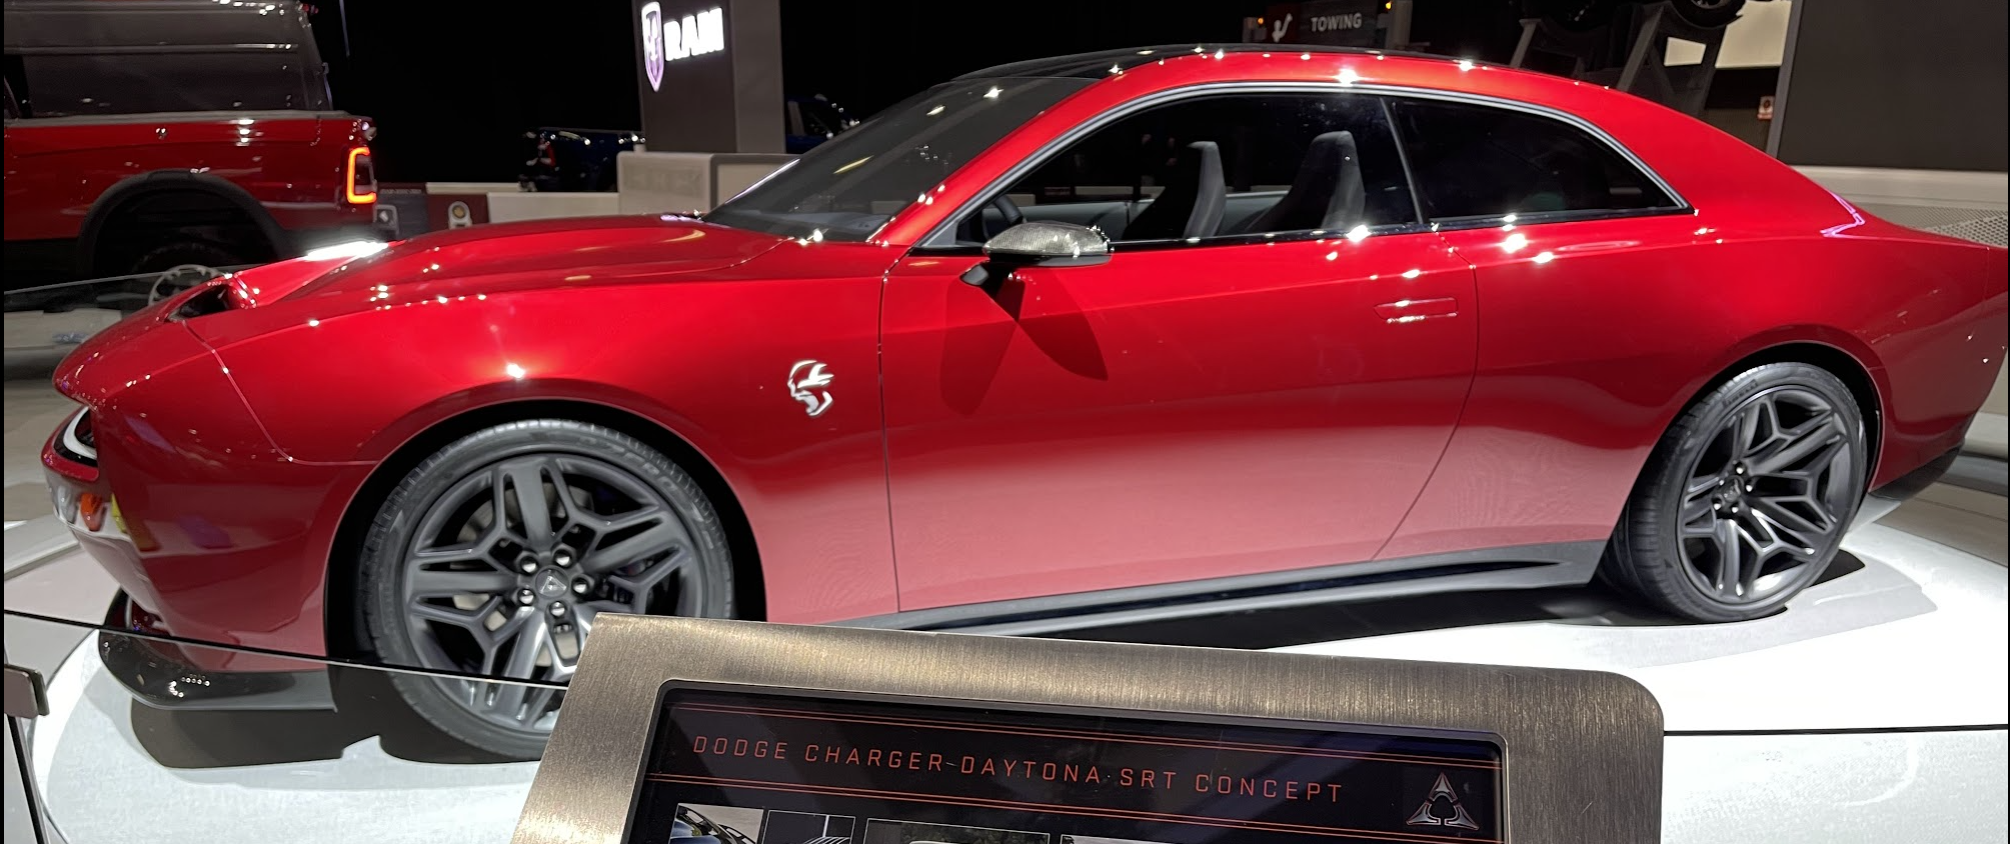 First Look: 800V Dodge Charger SRT walkaround, in Red